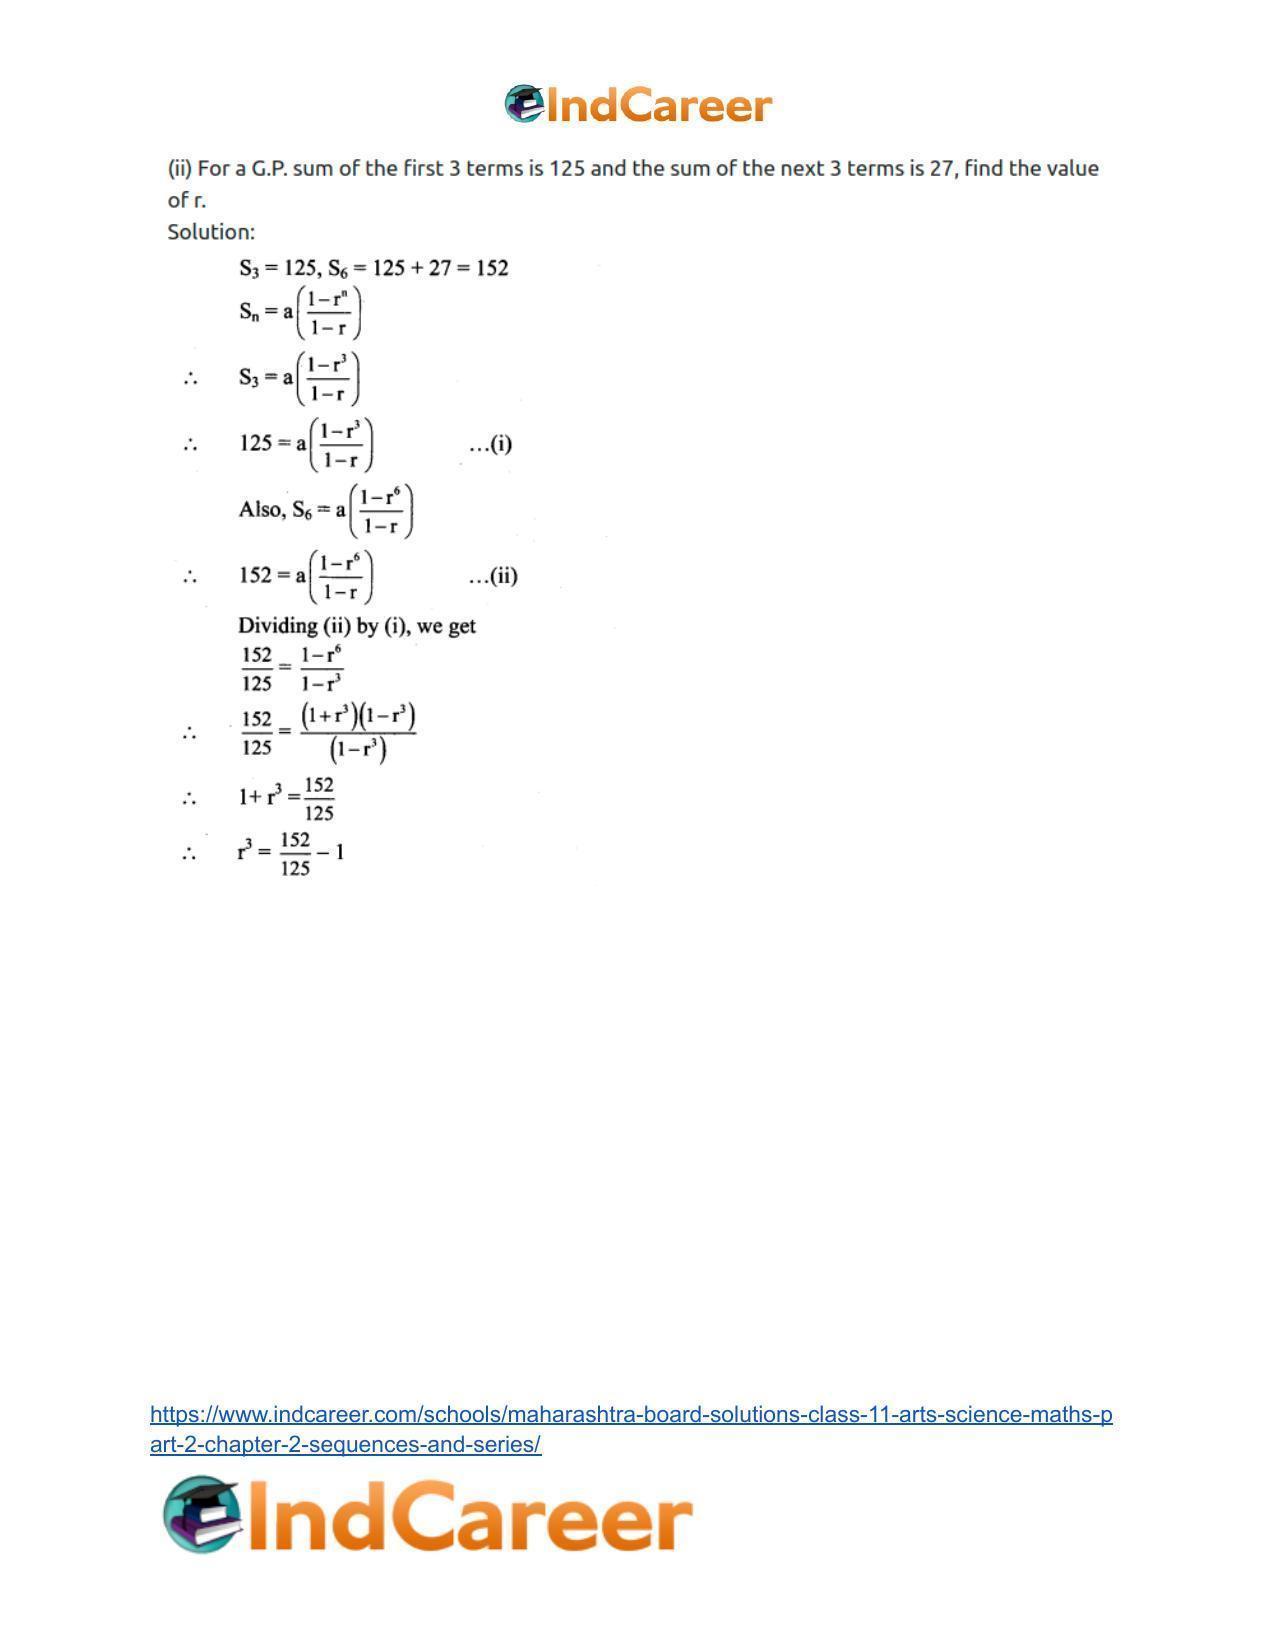 Maharashtra Board Solutions Class 11-Arts & Science Maths (Part 2): Chapter 2- Sequences and Series - Page 26